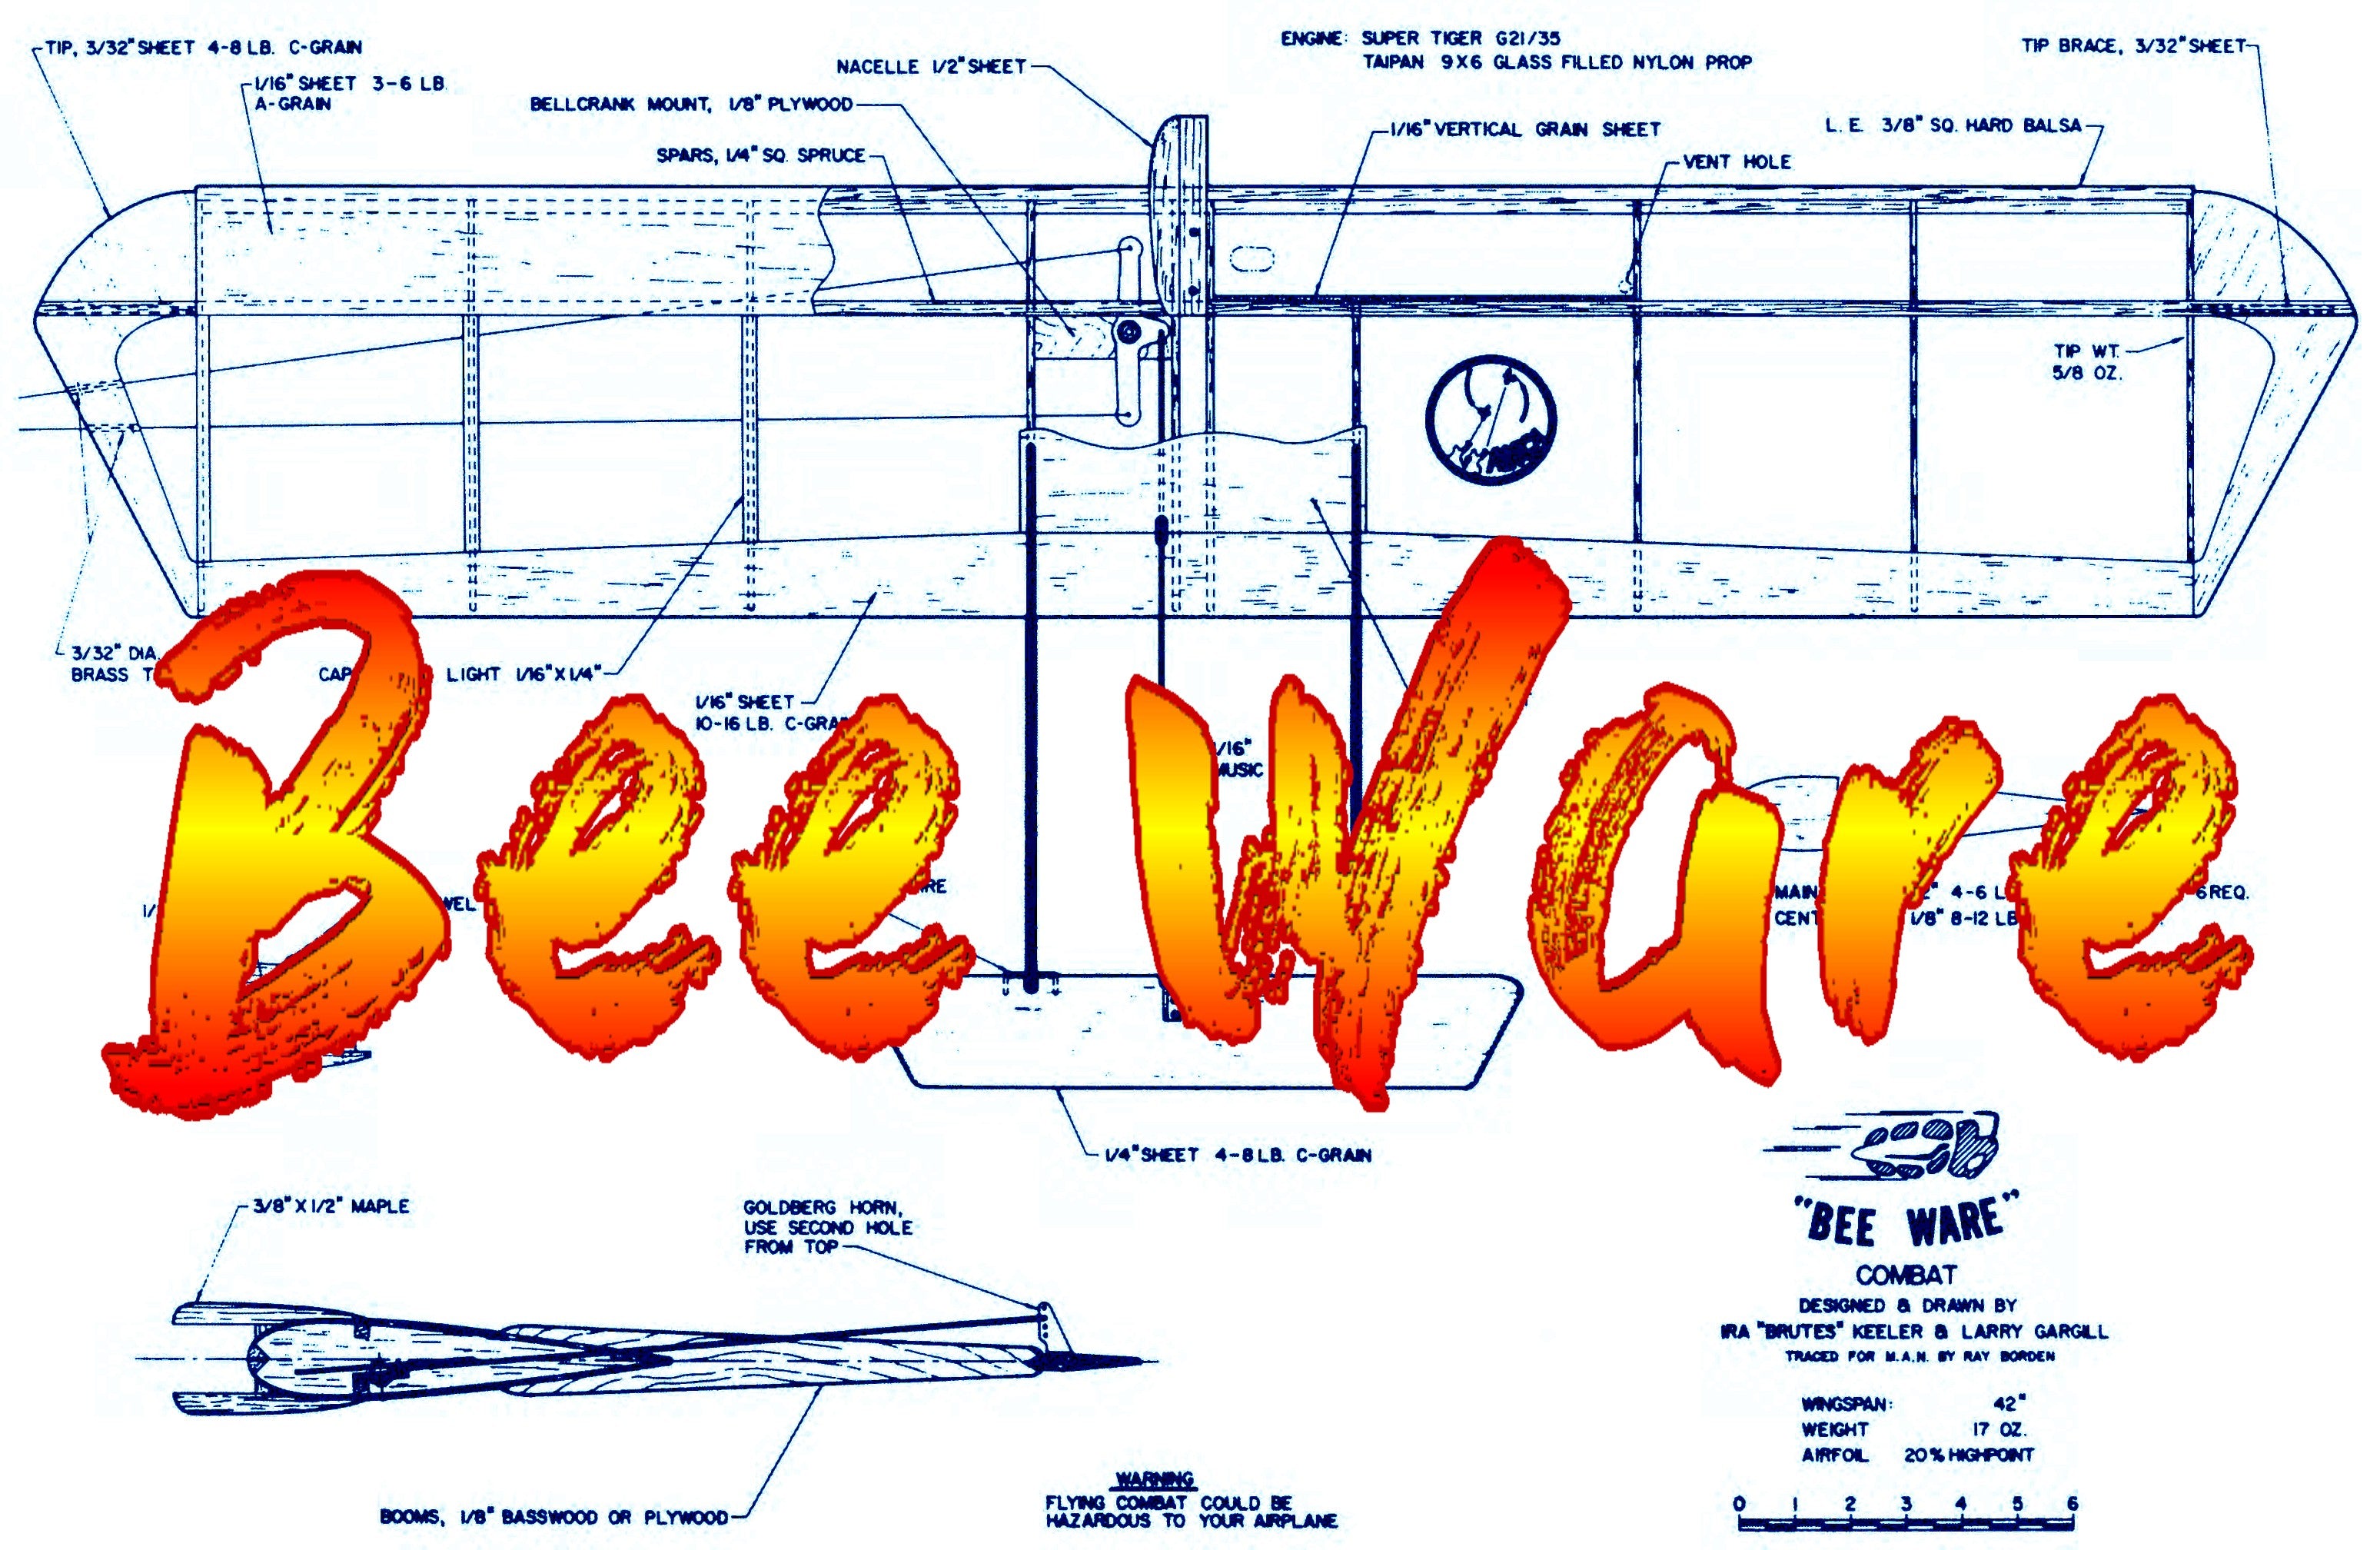 full size printed plan & building notes combat plane bee ware wingspan 42 “  engine .35